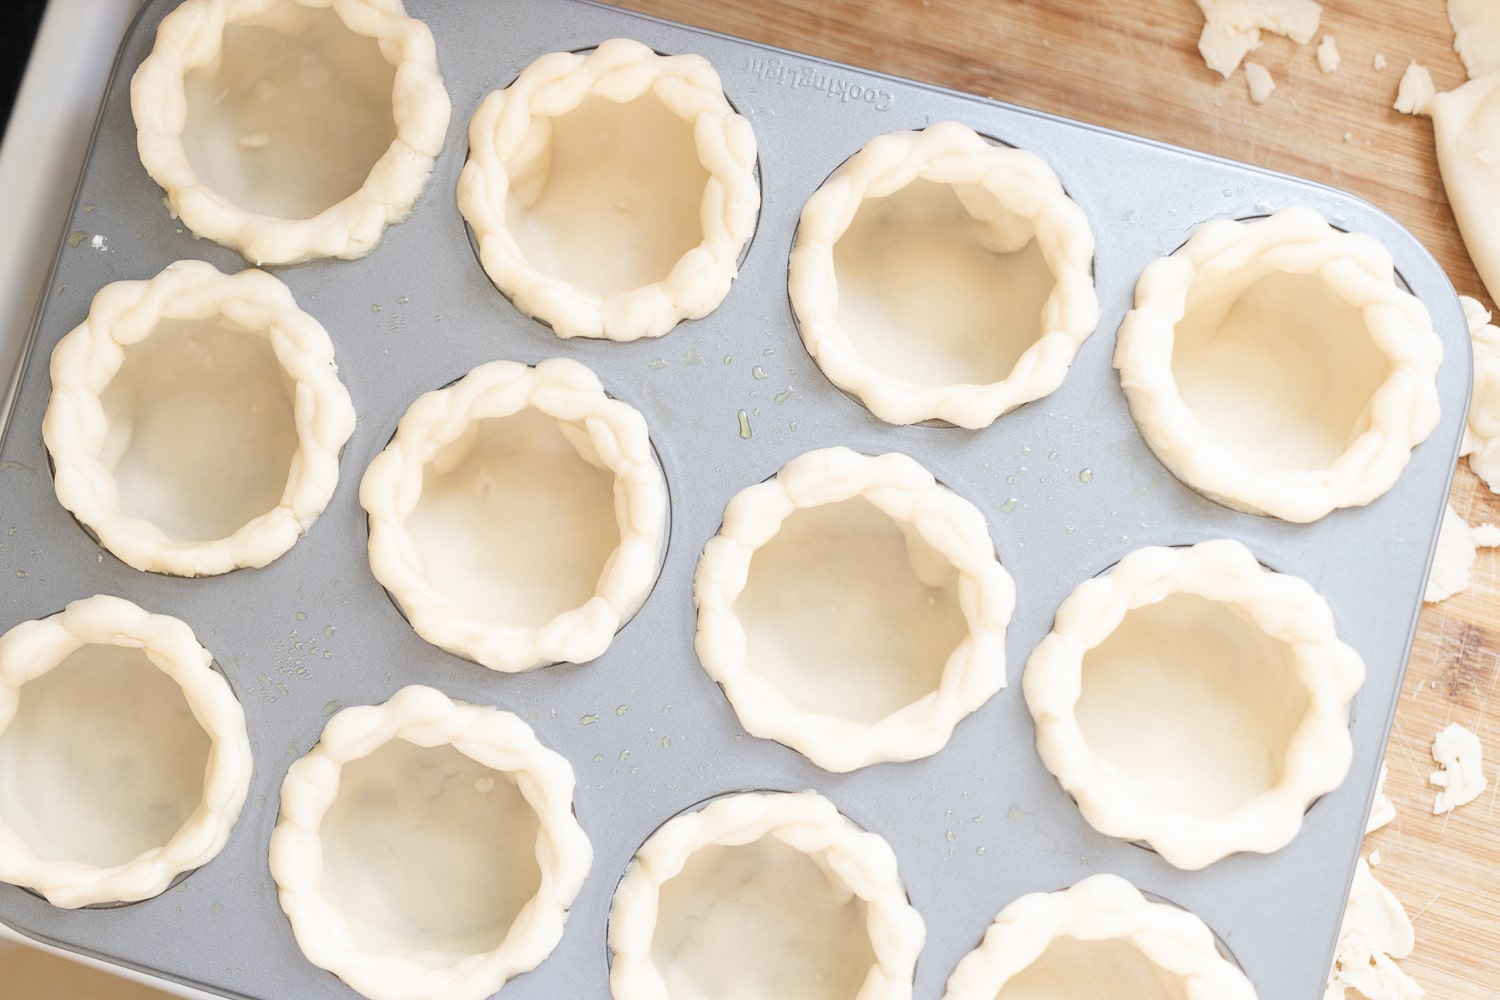 Blogger Stephanie Ziajka shows how to make mini pies in a muffin tin on Diary of a Debutante